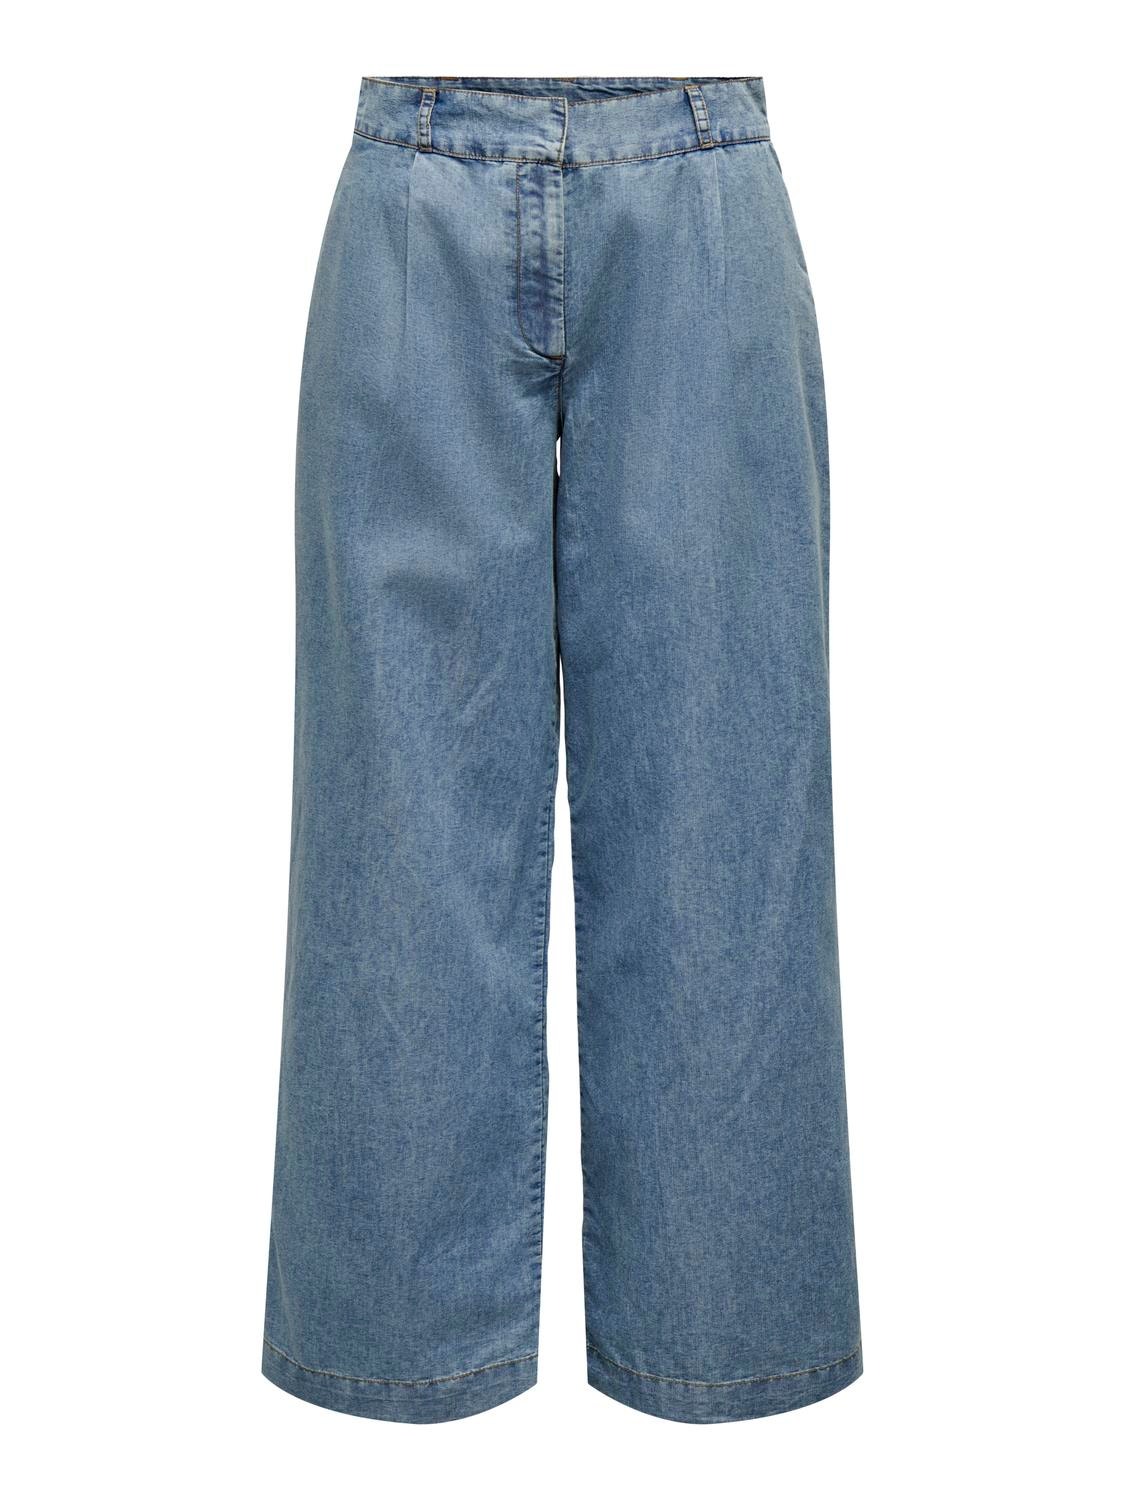 ONLY Trousers with mid wiast -Medium Blue Denim - 15333547